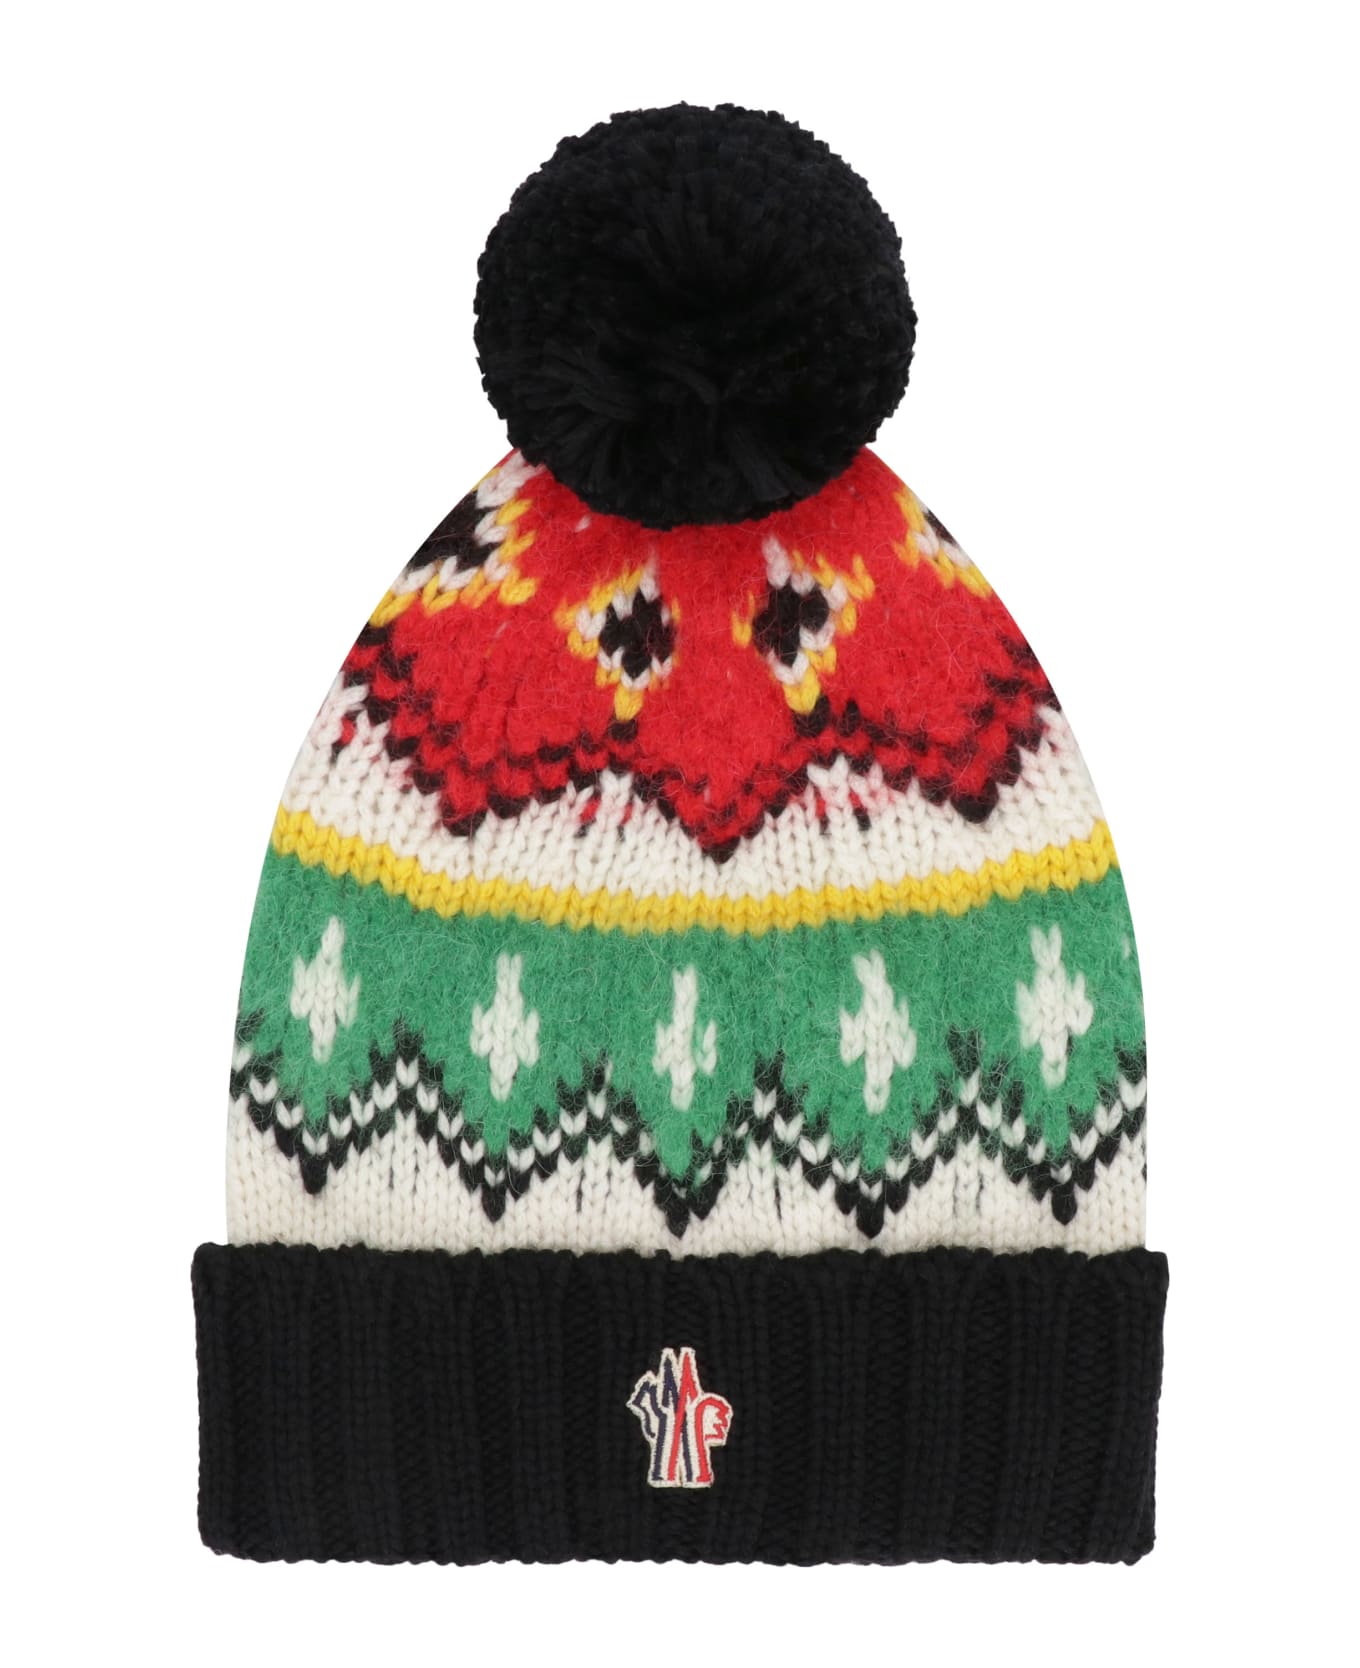 Moncler Grenoble Knitted Wool Hat With Pom-pom - Multicolor